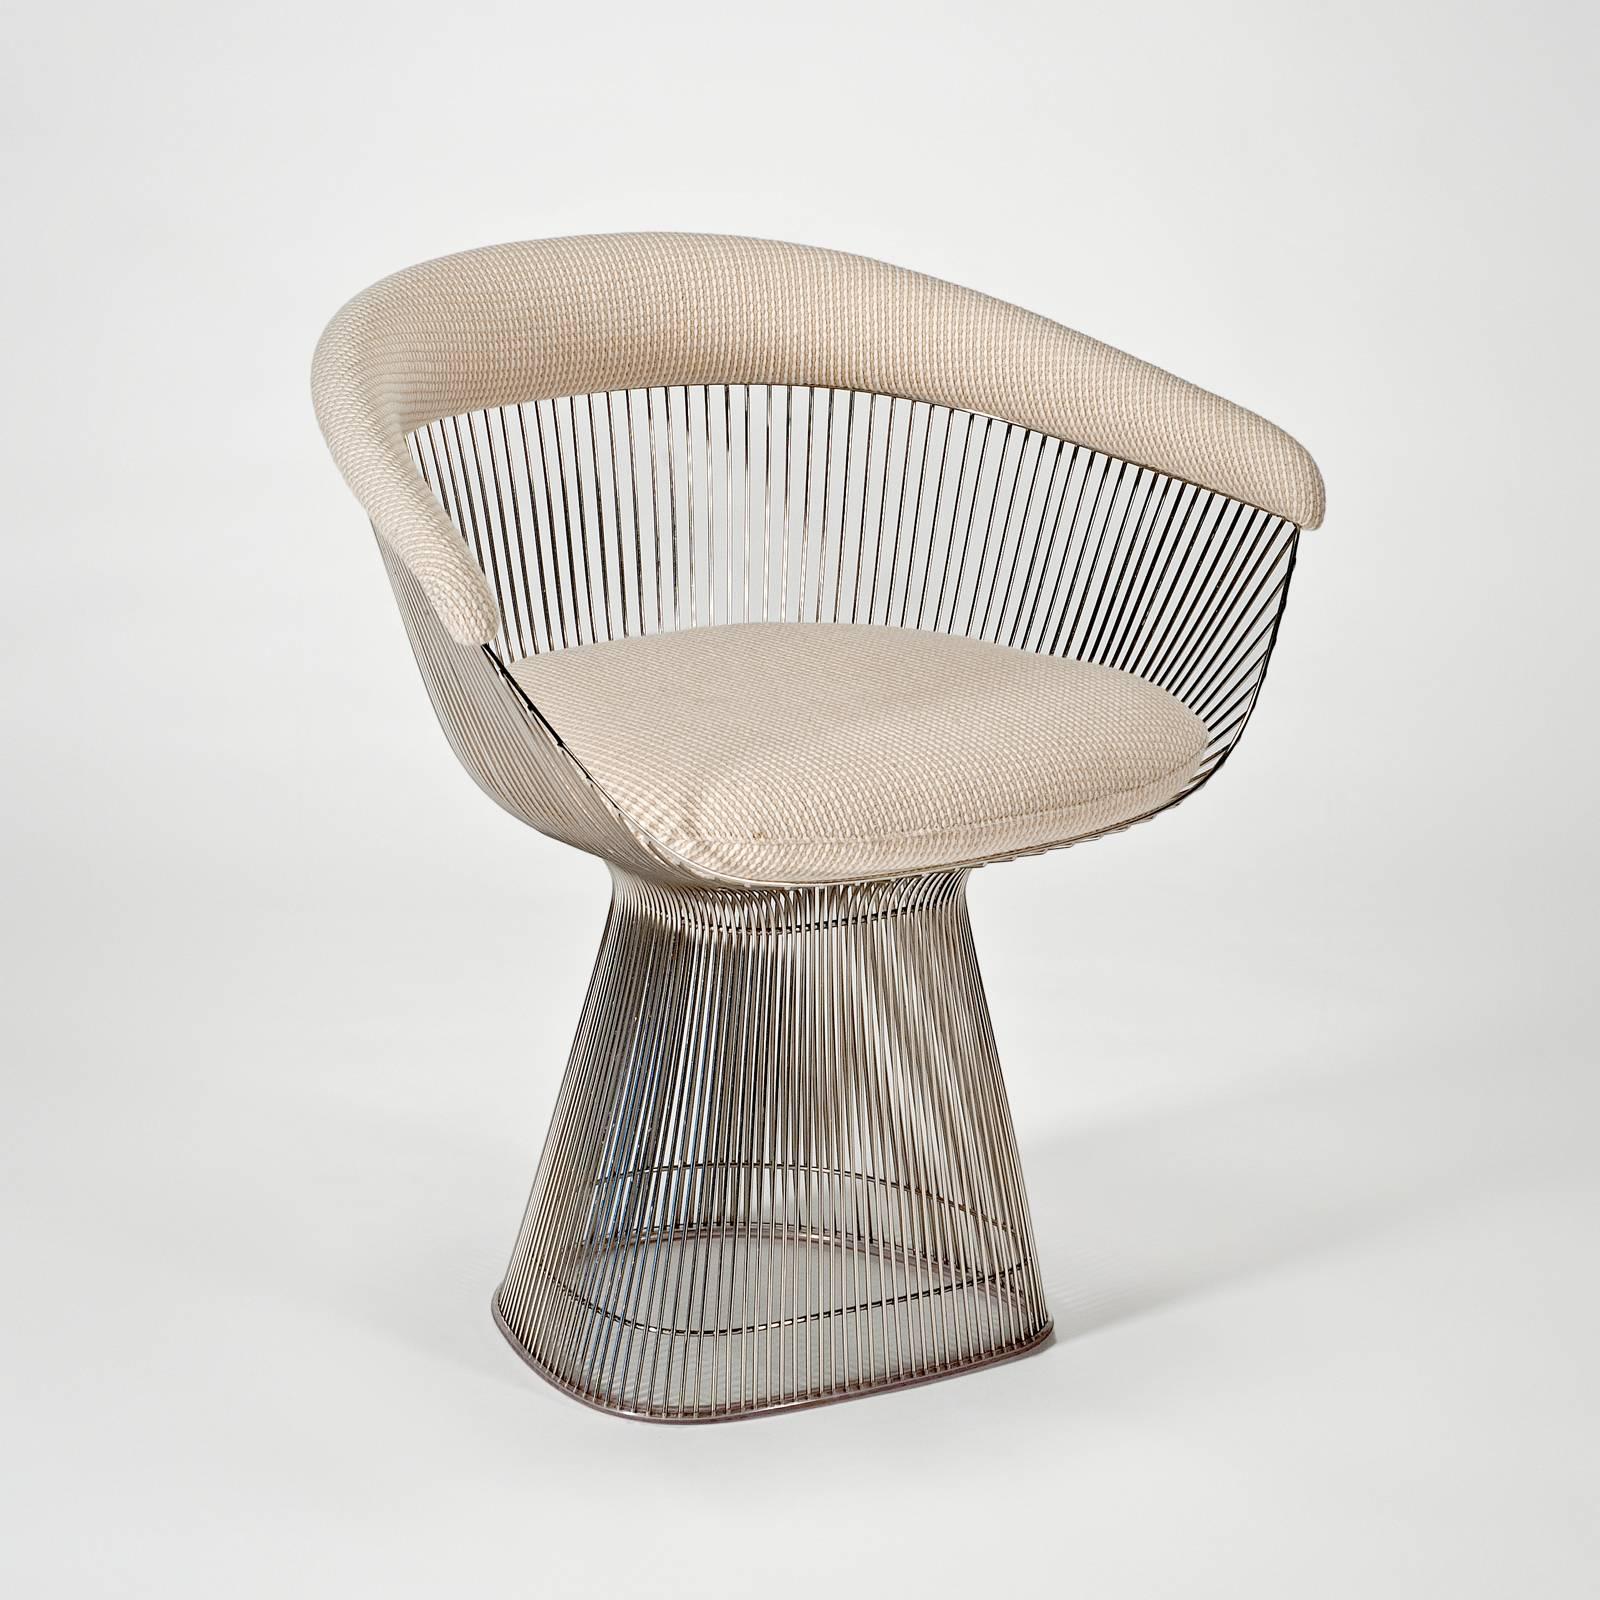 Originally designed in 1966 by Warren Platner as the centerpiece of a now-famous collection including tables, chairs and an ottoman and  and manufactured circa 2010. The process of welding steel rods to circular frames creates a moire pattern in the